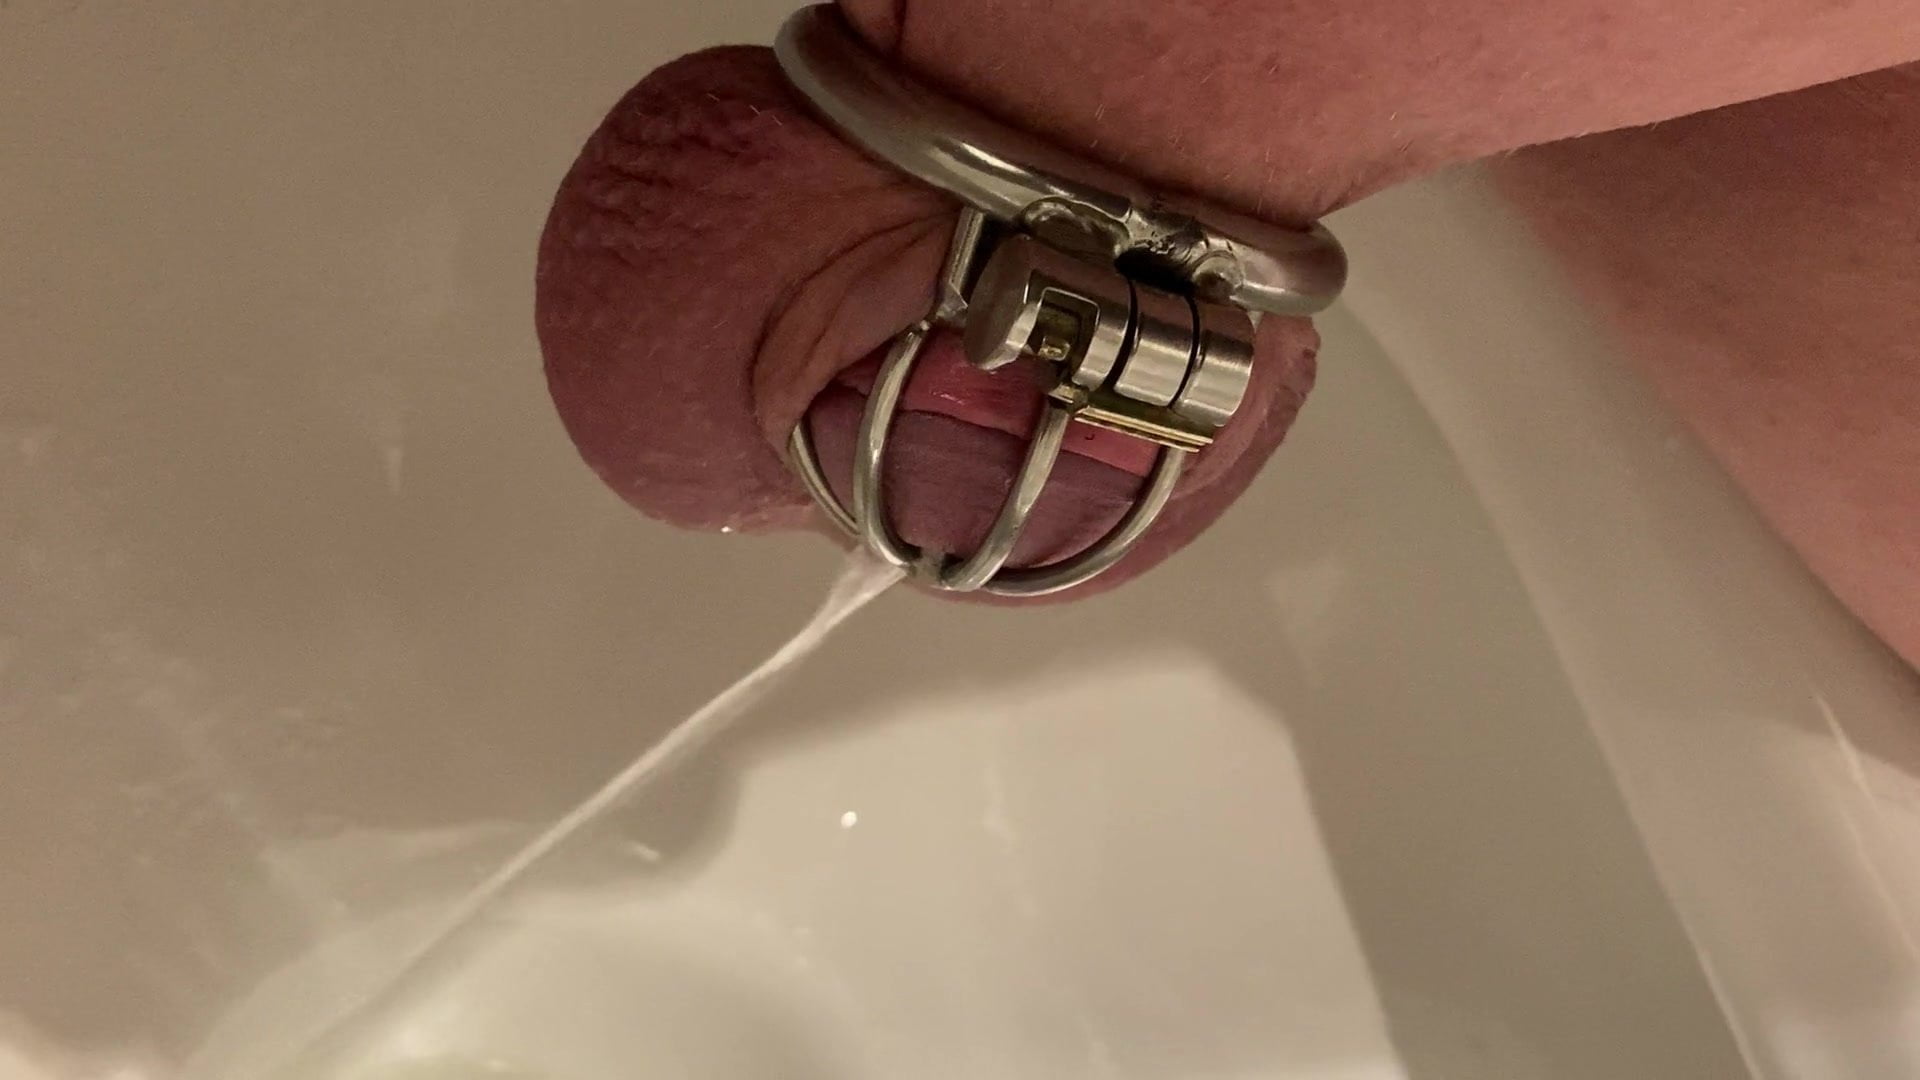 Pissing in chastity.